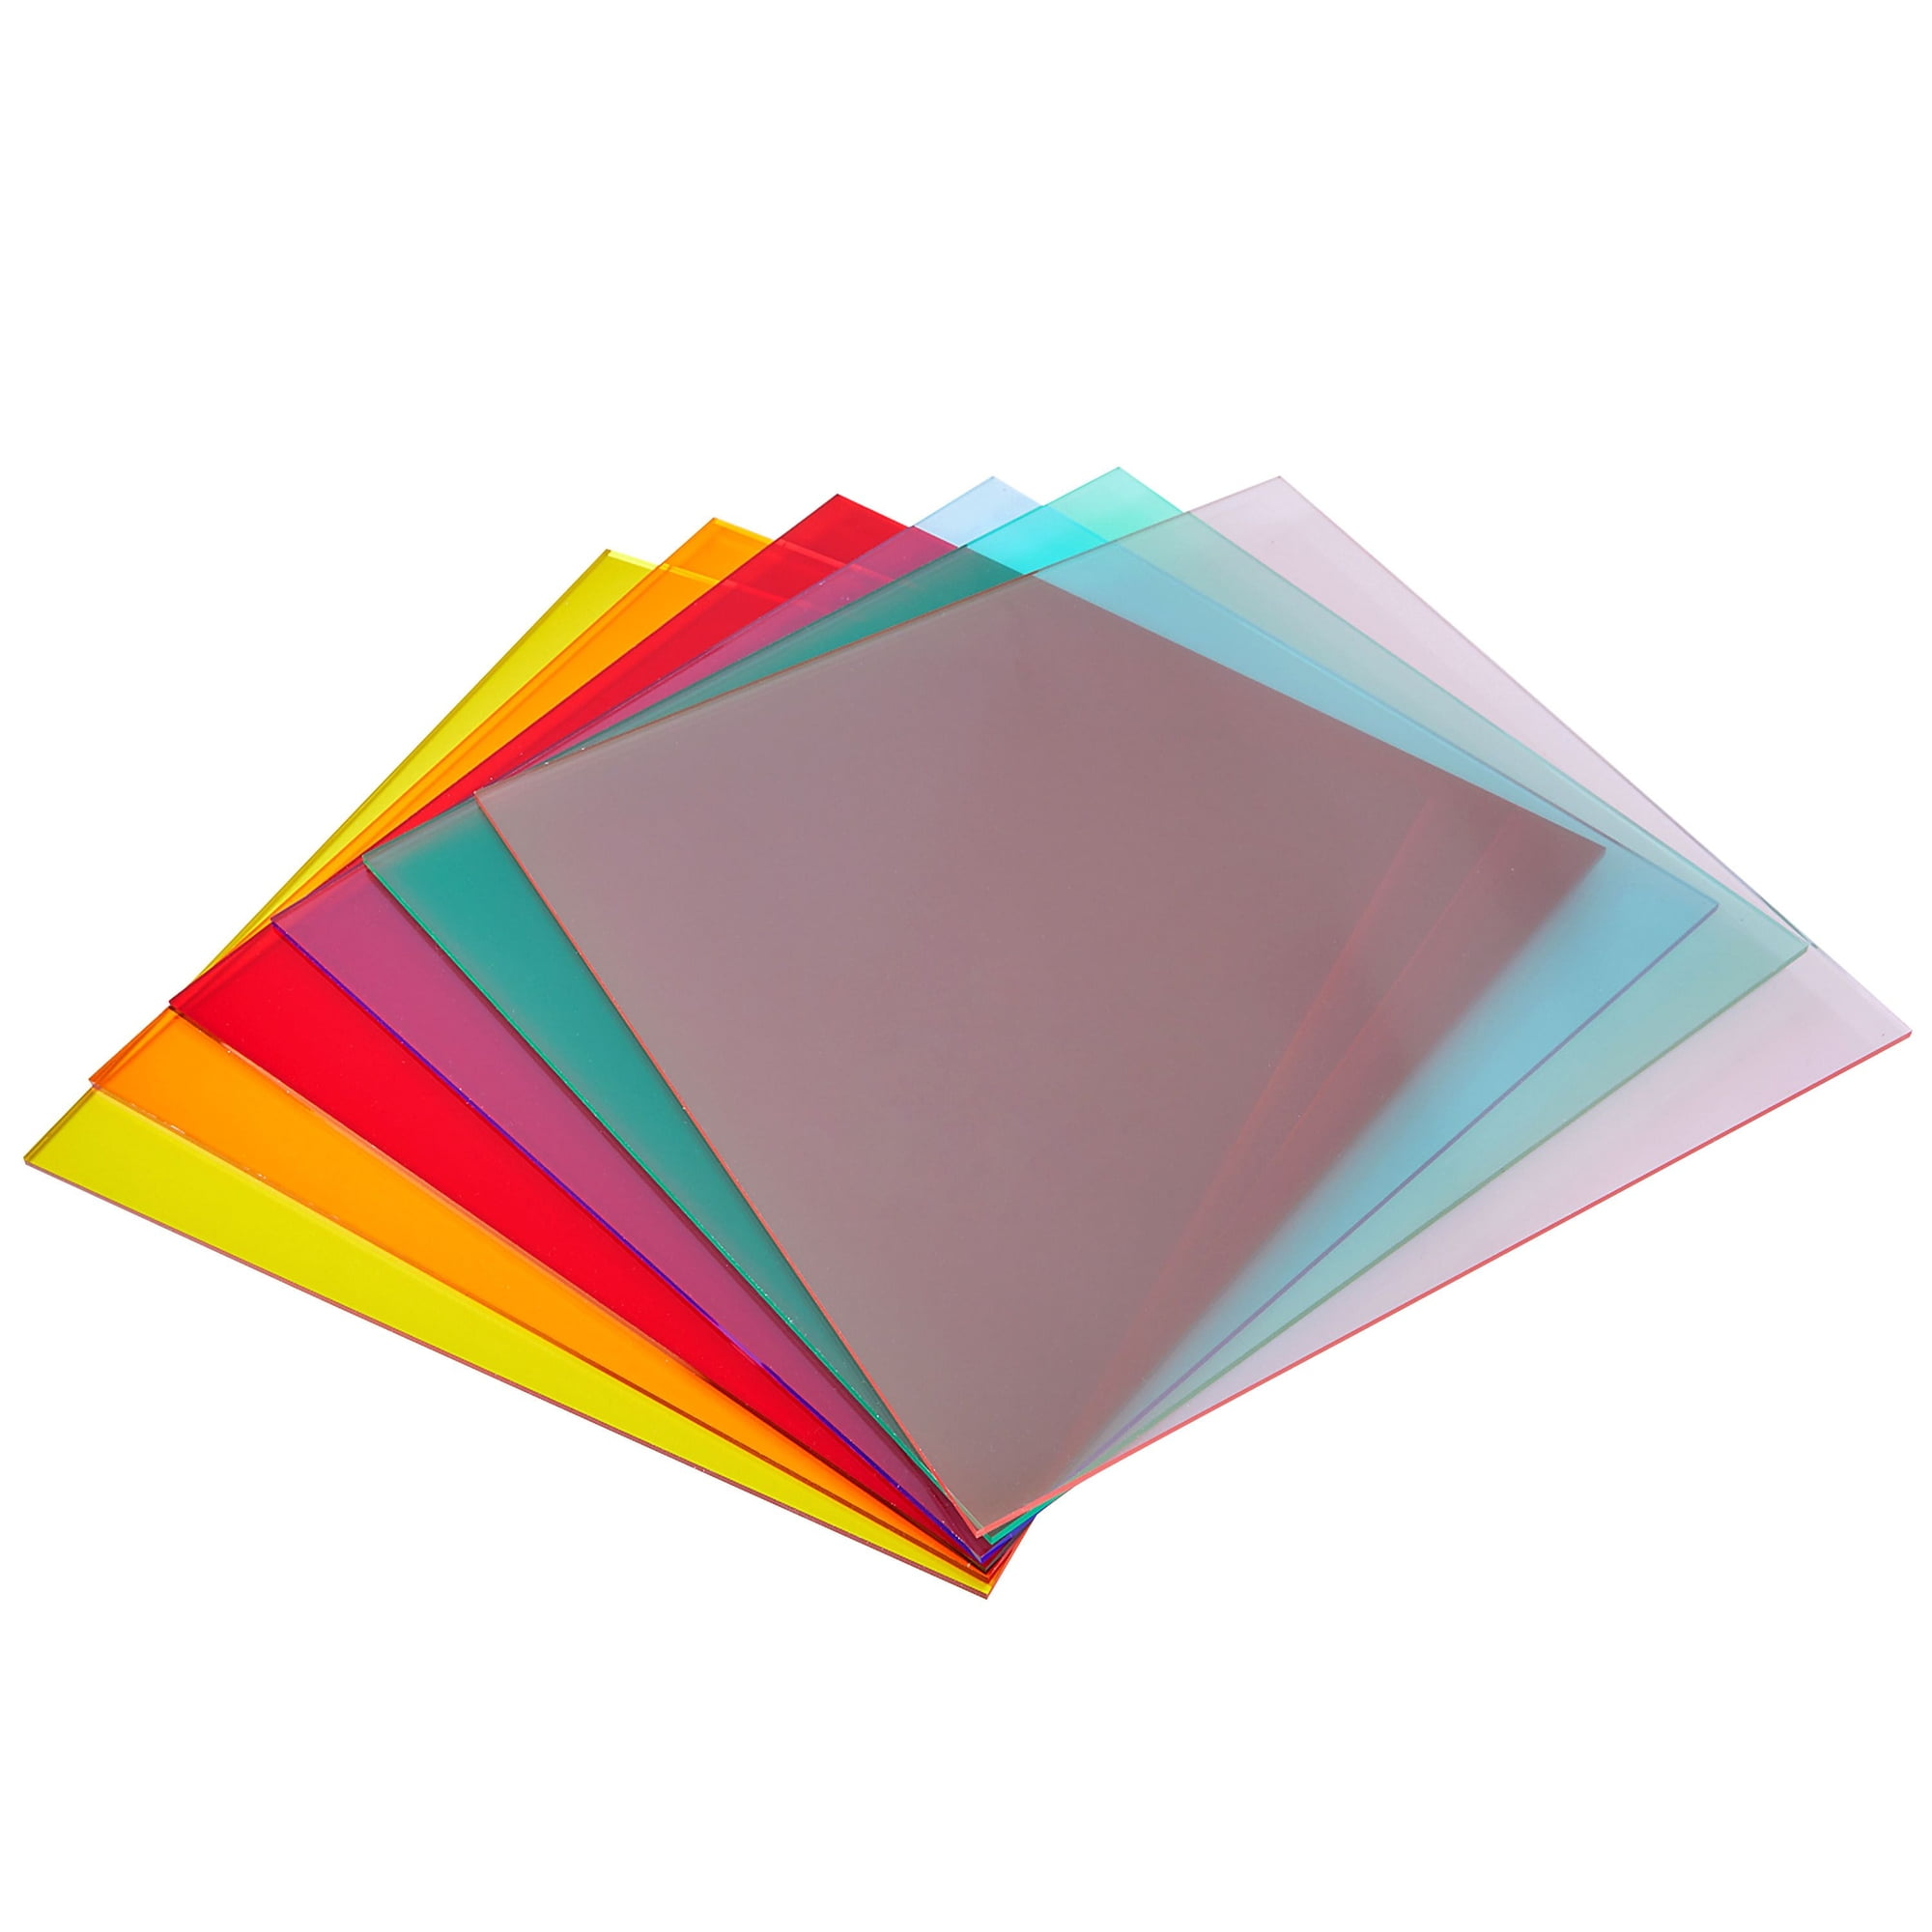 8 Pack Colored Acrylic Sheets 8 X 12 Inch, Translucent Cast Acrylic Sheet  Plexiglass Sheet 1/8 Inch Thick Acrylic Panel Colored Plastic Sheets for  Art